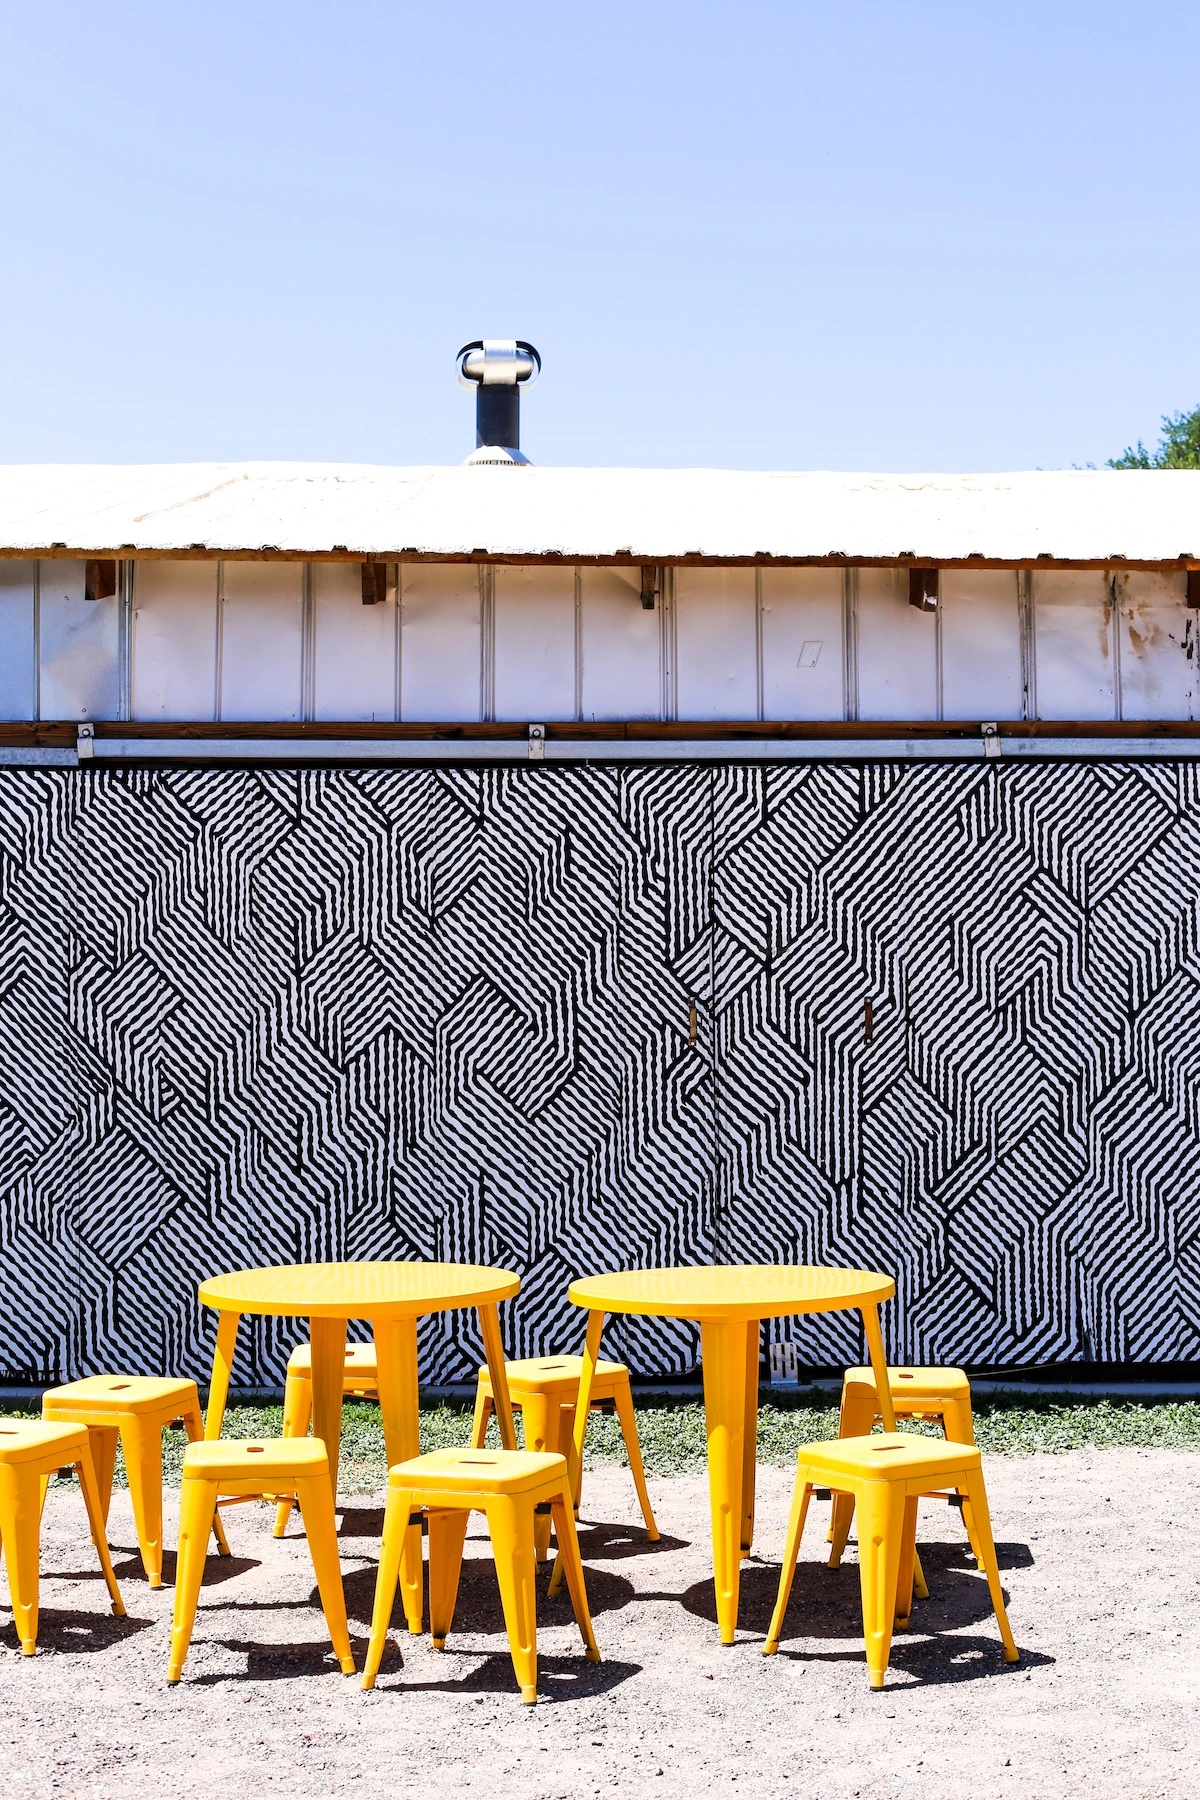 Yellow table and stools outside a building with a black and white geometric mural painted on the side.